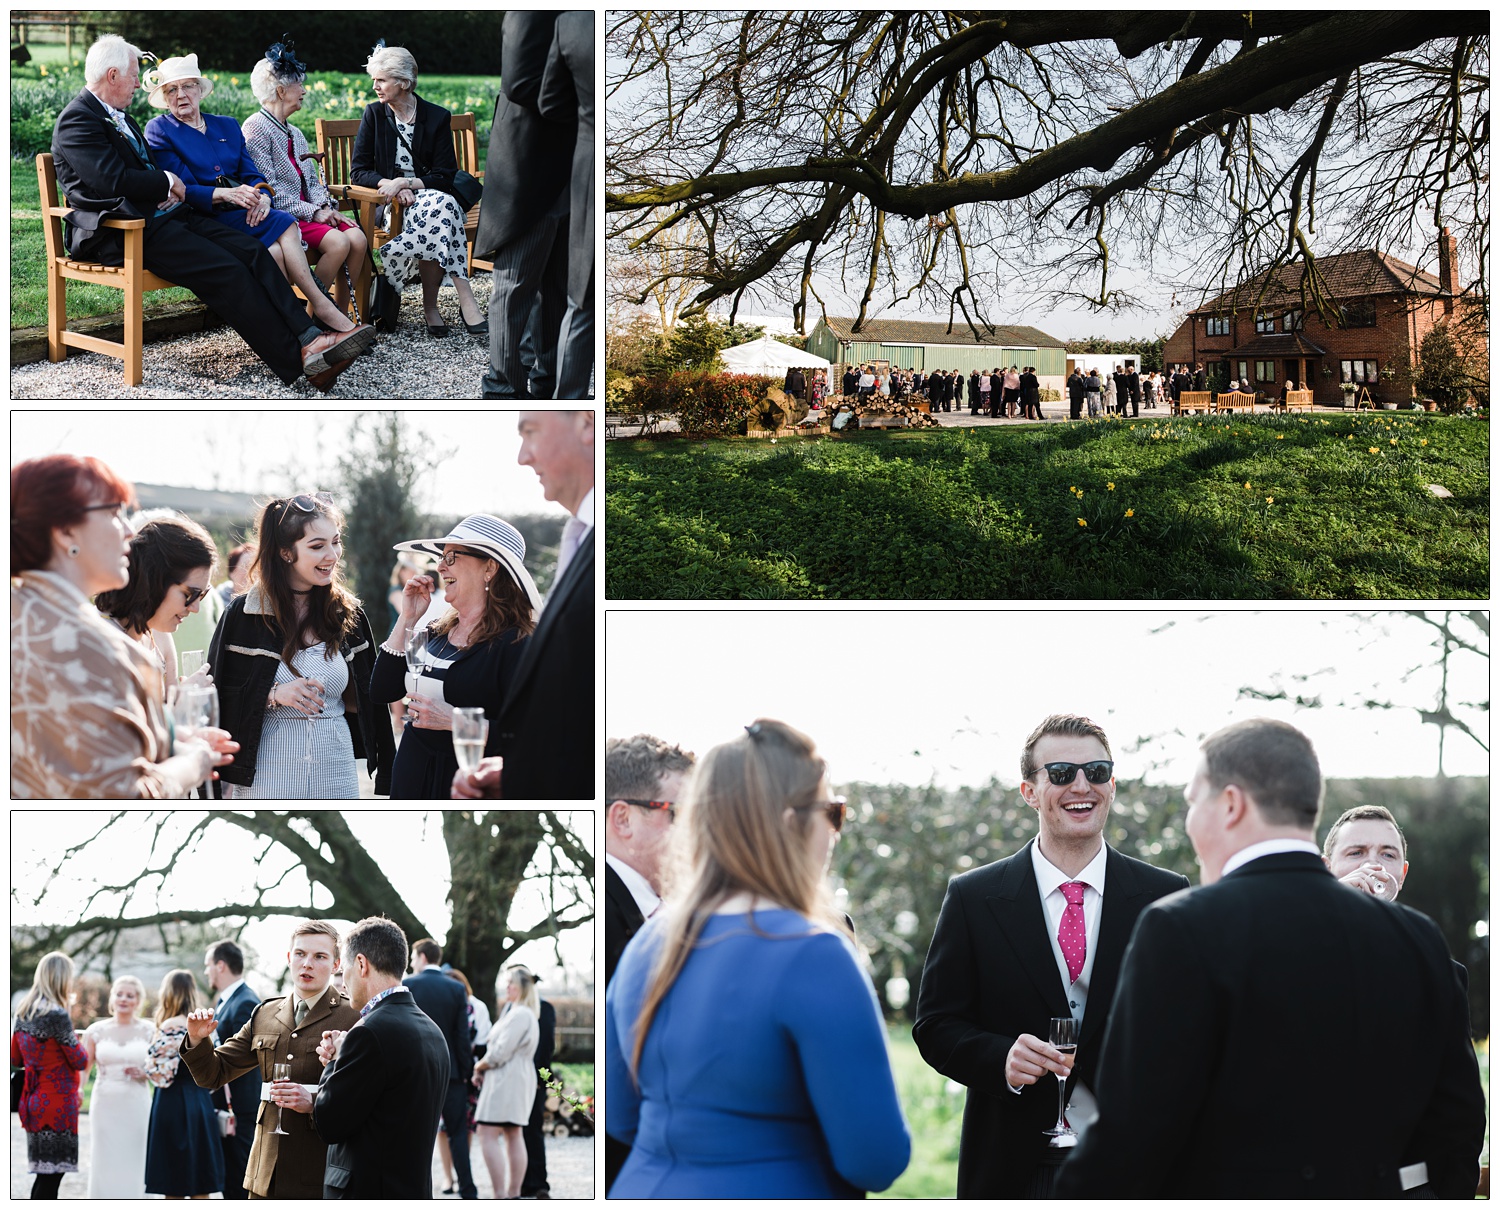 a few from under a tree of the house and wedding party mingling.